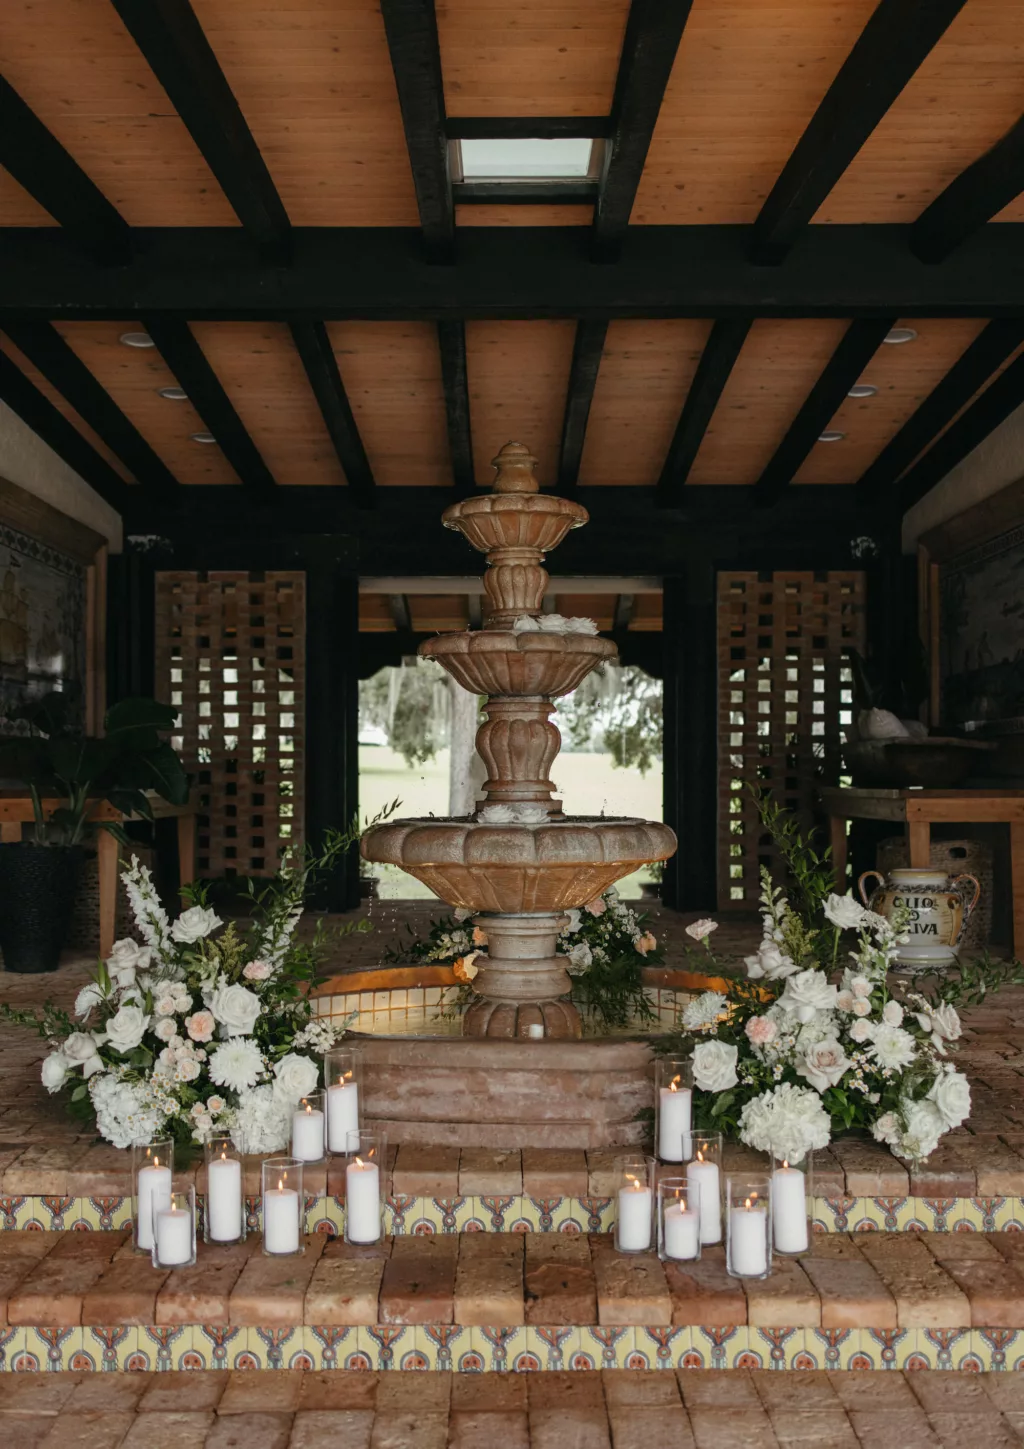 Spanish Style Fountain at Tampa Bay Event Venue La Hacienda on Snow Hill | Candlelit Wedding Venue Entrance Decor Ideas | White Roses, Hydrangeas, Chrysanthemums, Feverfew Daisies, Stock Flowers, and Greenery